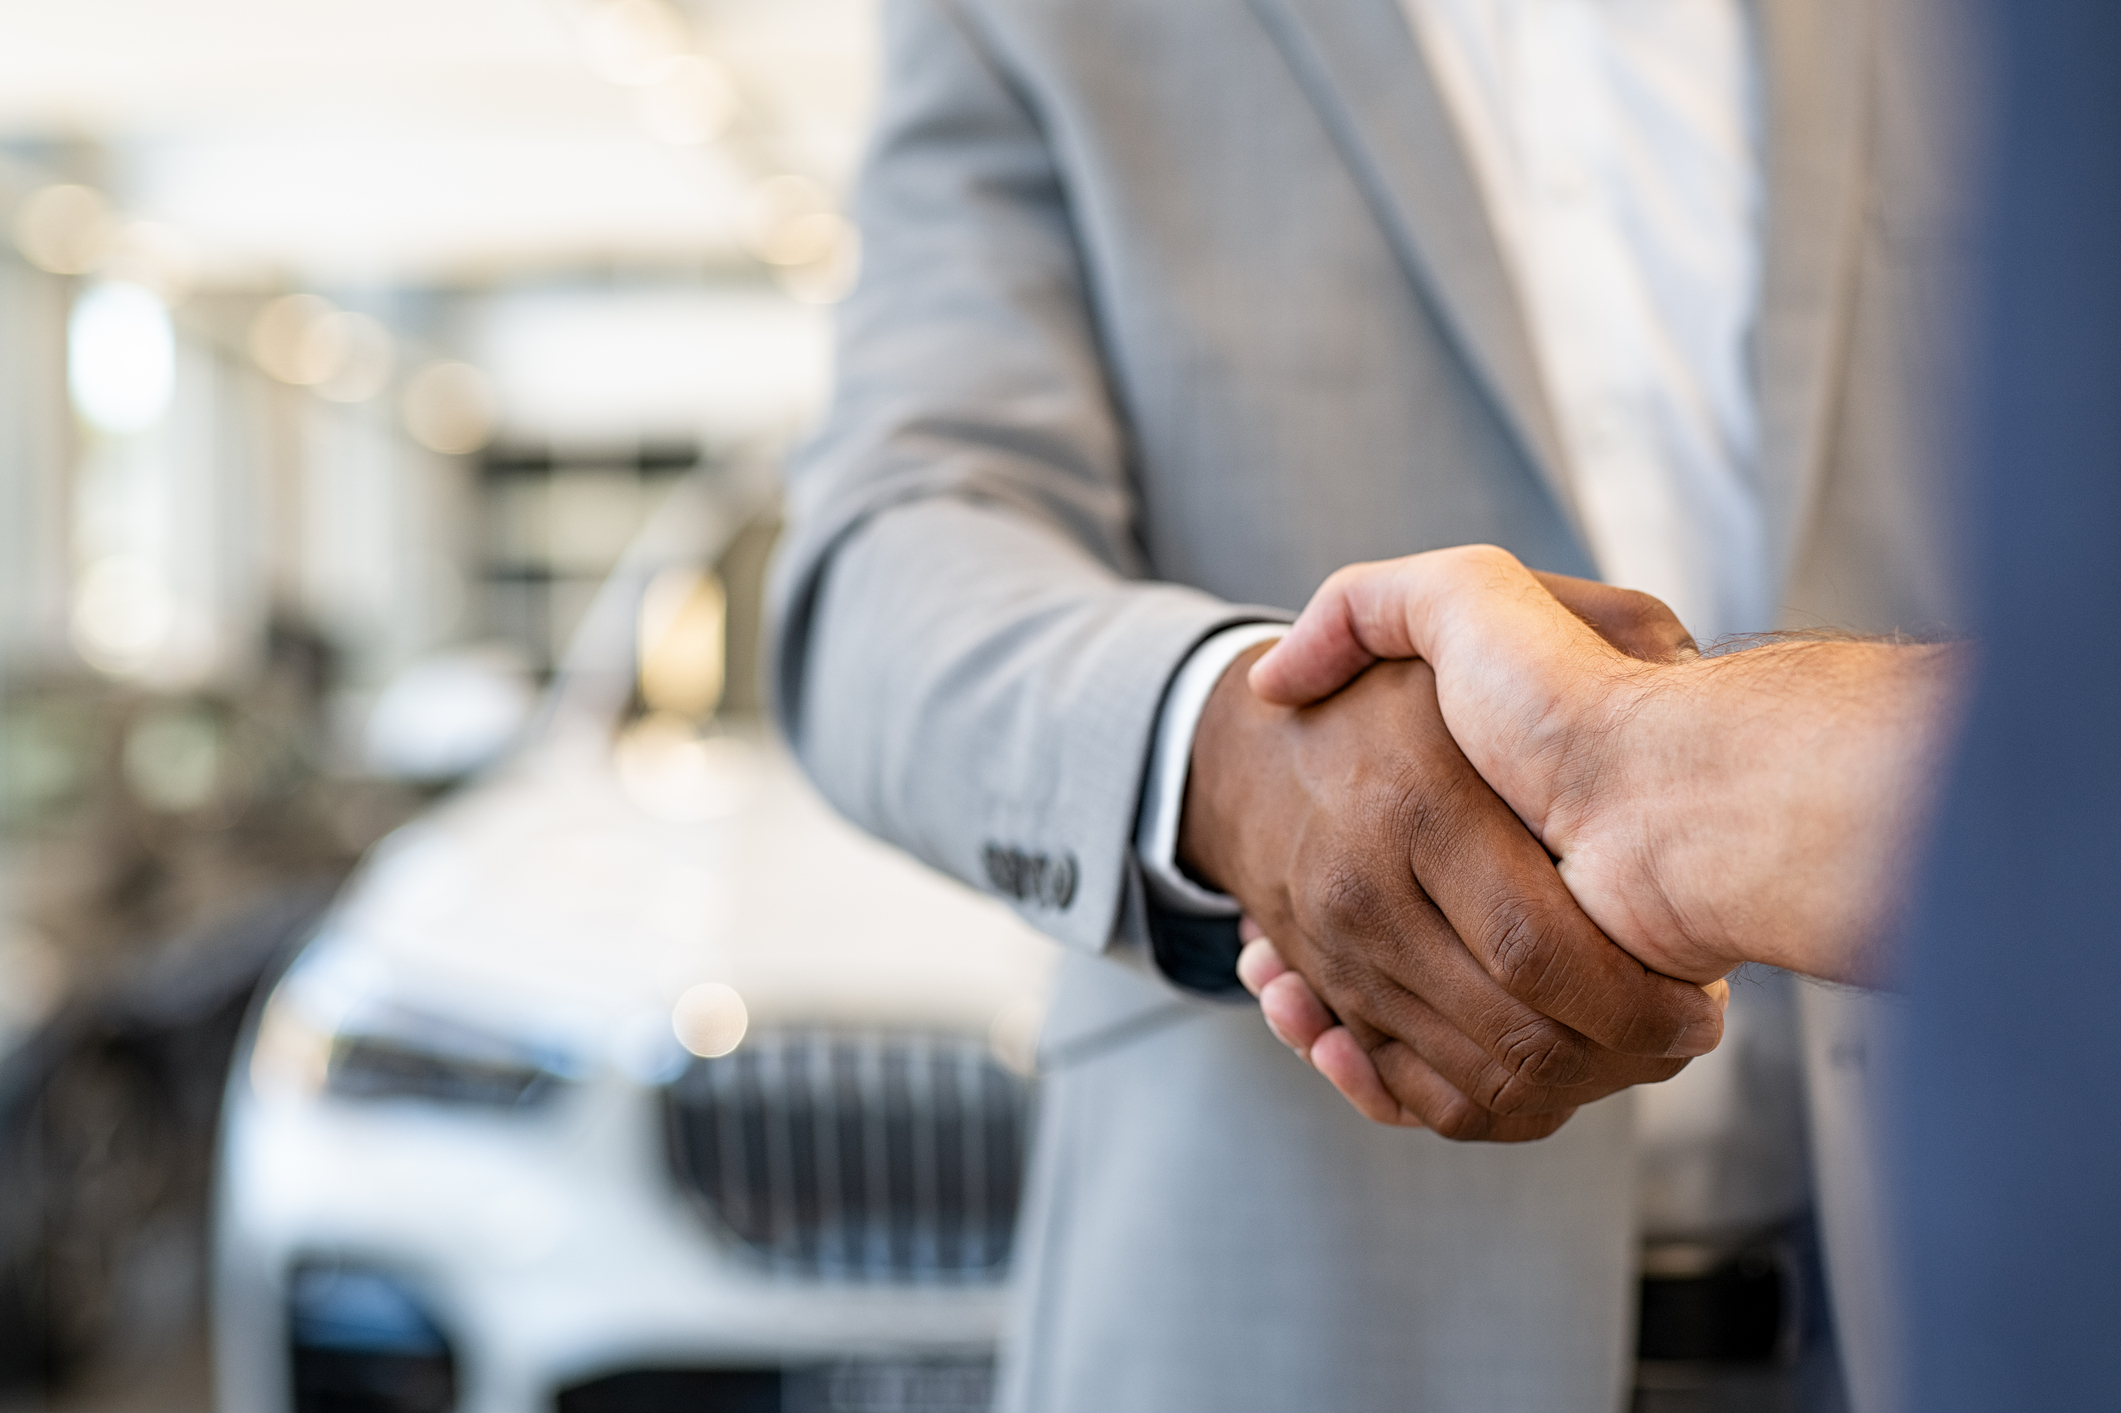 What Do Consumers Look For In a Car Dealership?